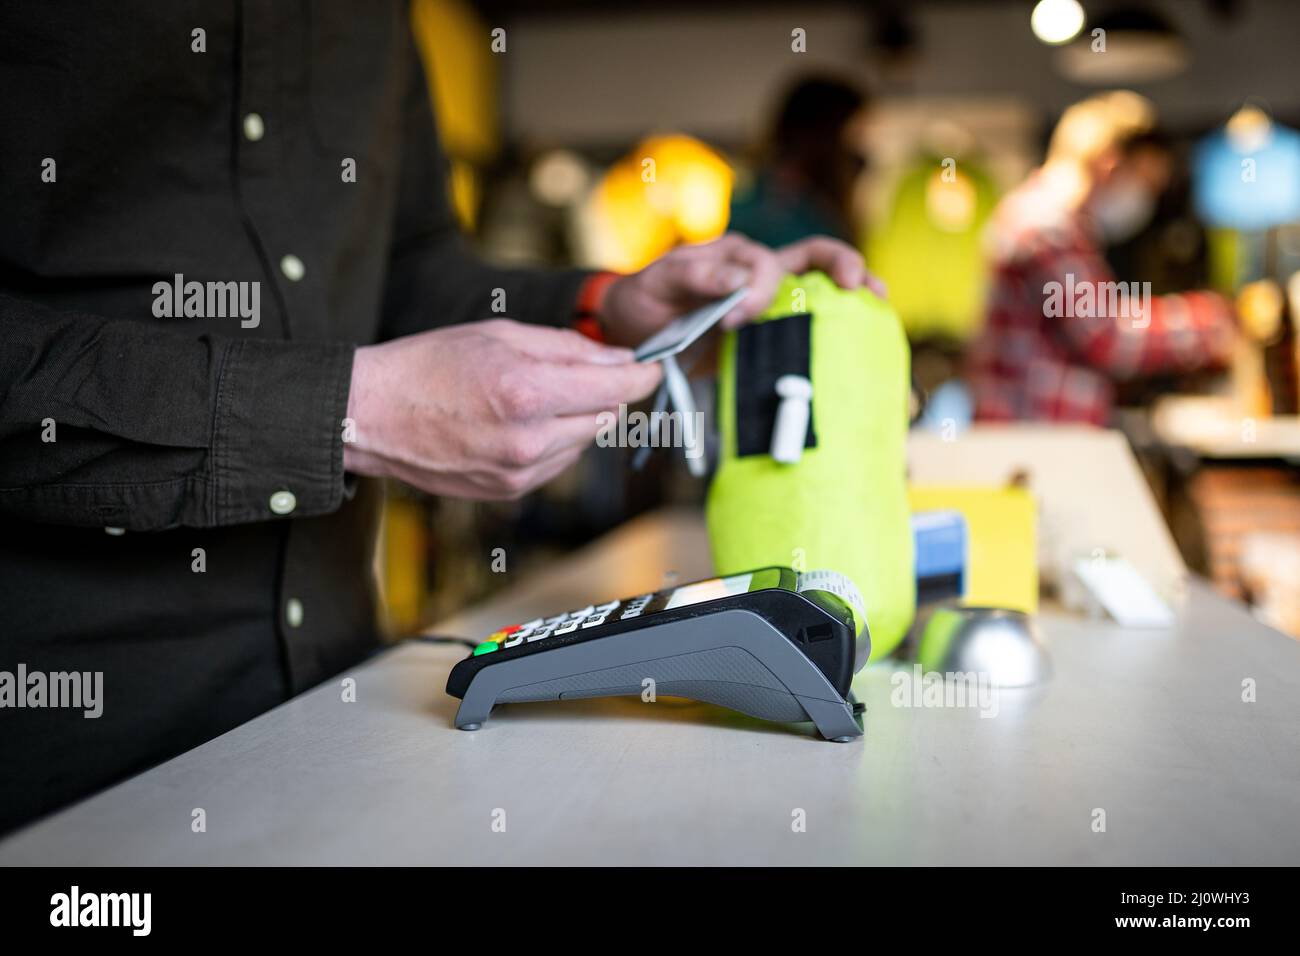 Salesman holds payment terminal while holding receipt for completing purchase. Hands close up. Concept of NFC, business and bank Stock Photo